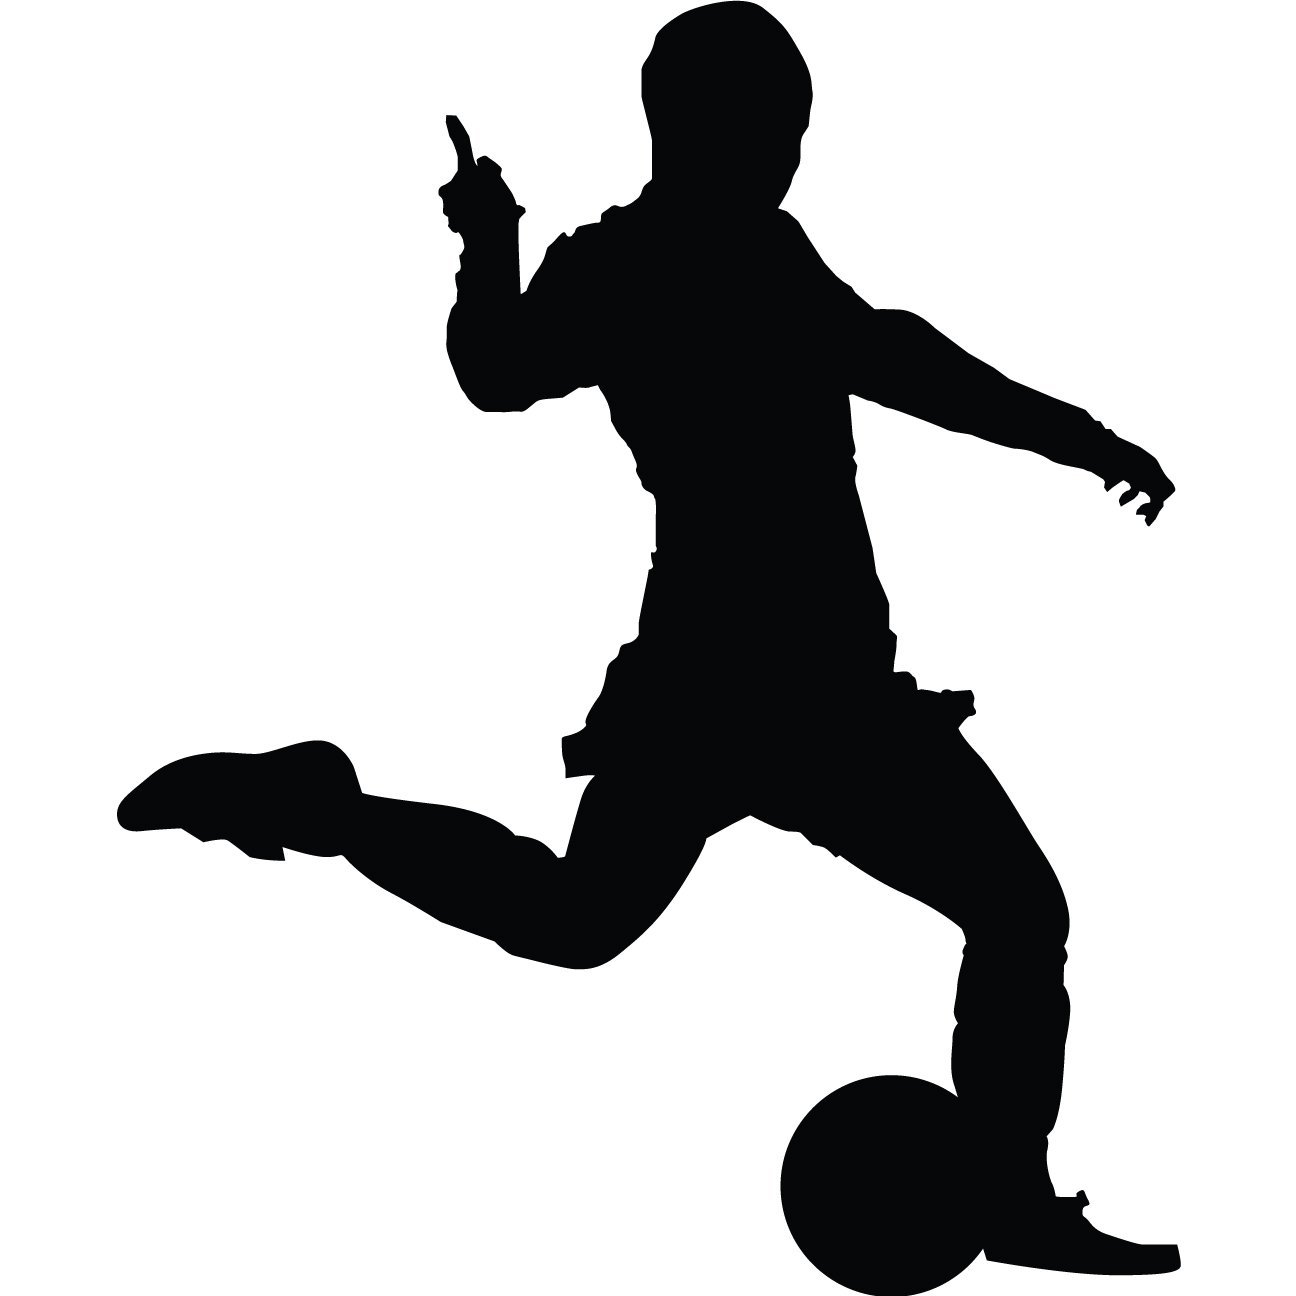 Soccer Player Silhouette   Clipart Panda   Free Clipart Images